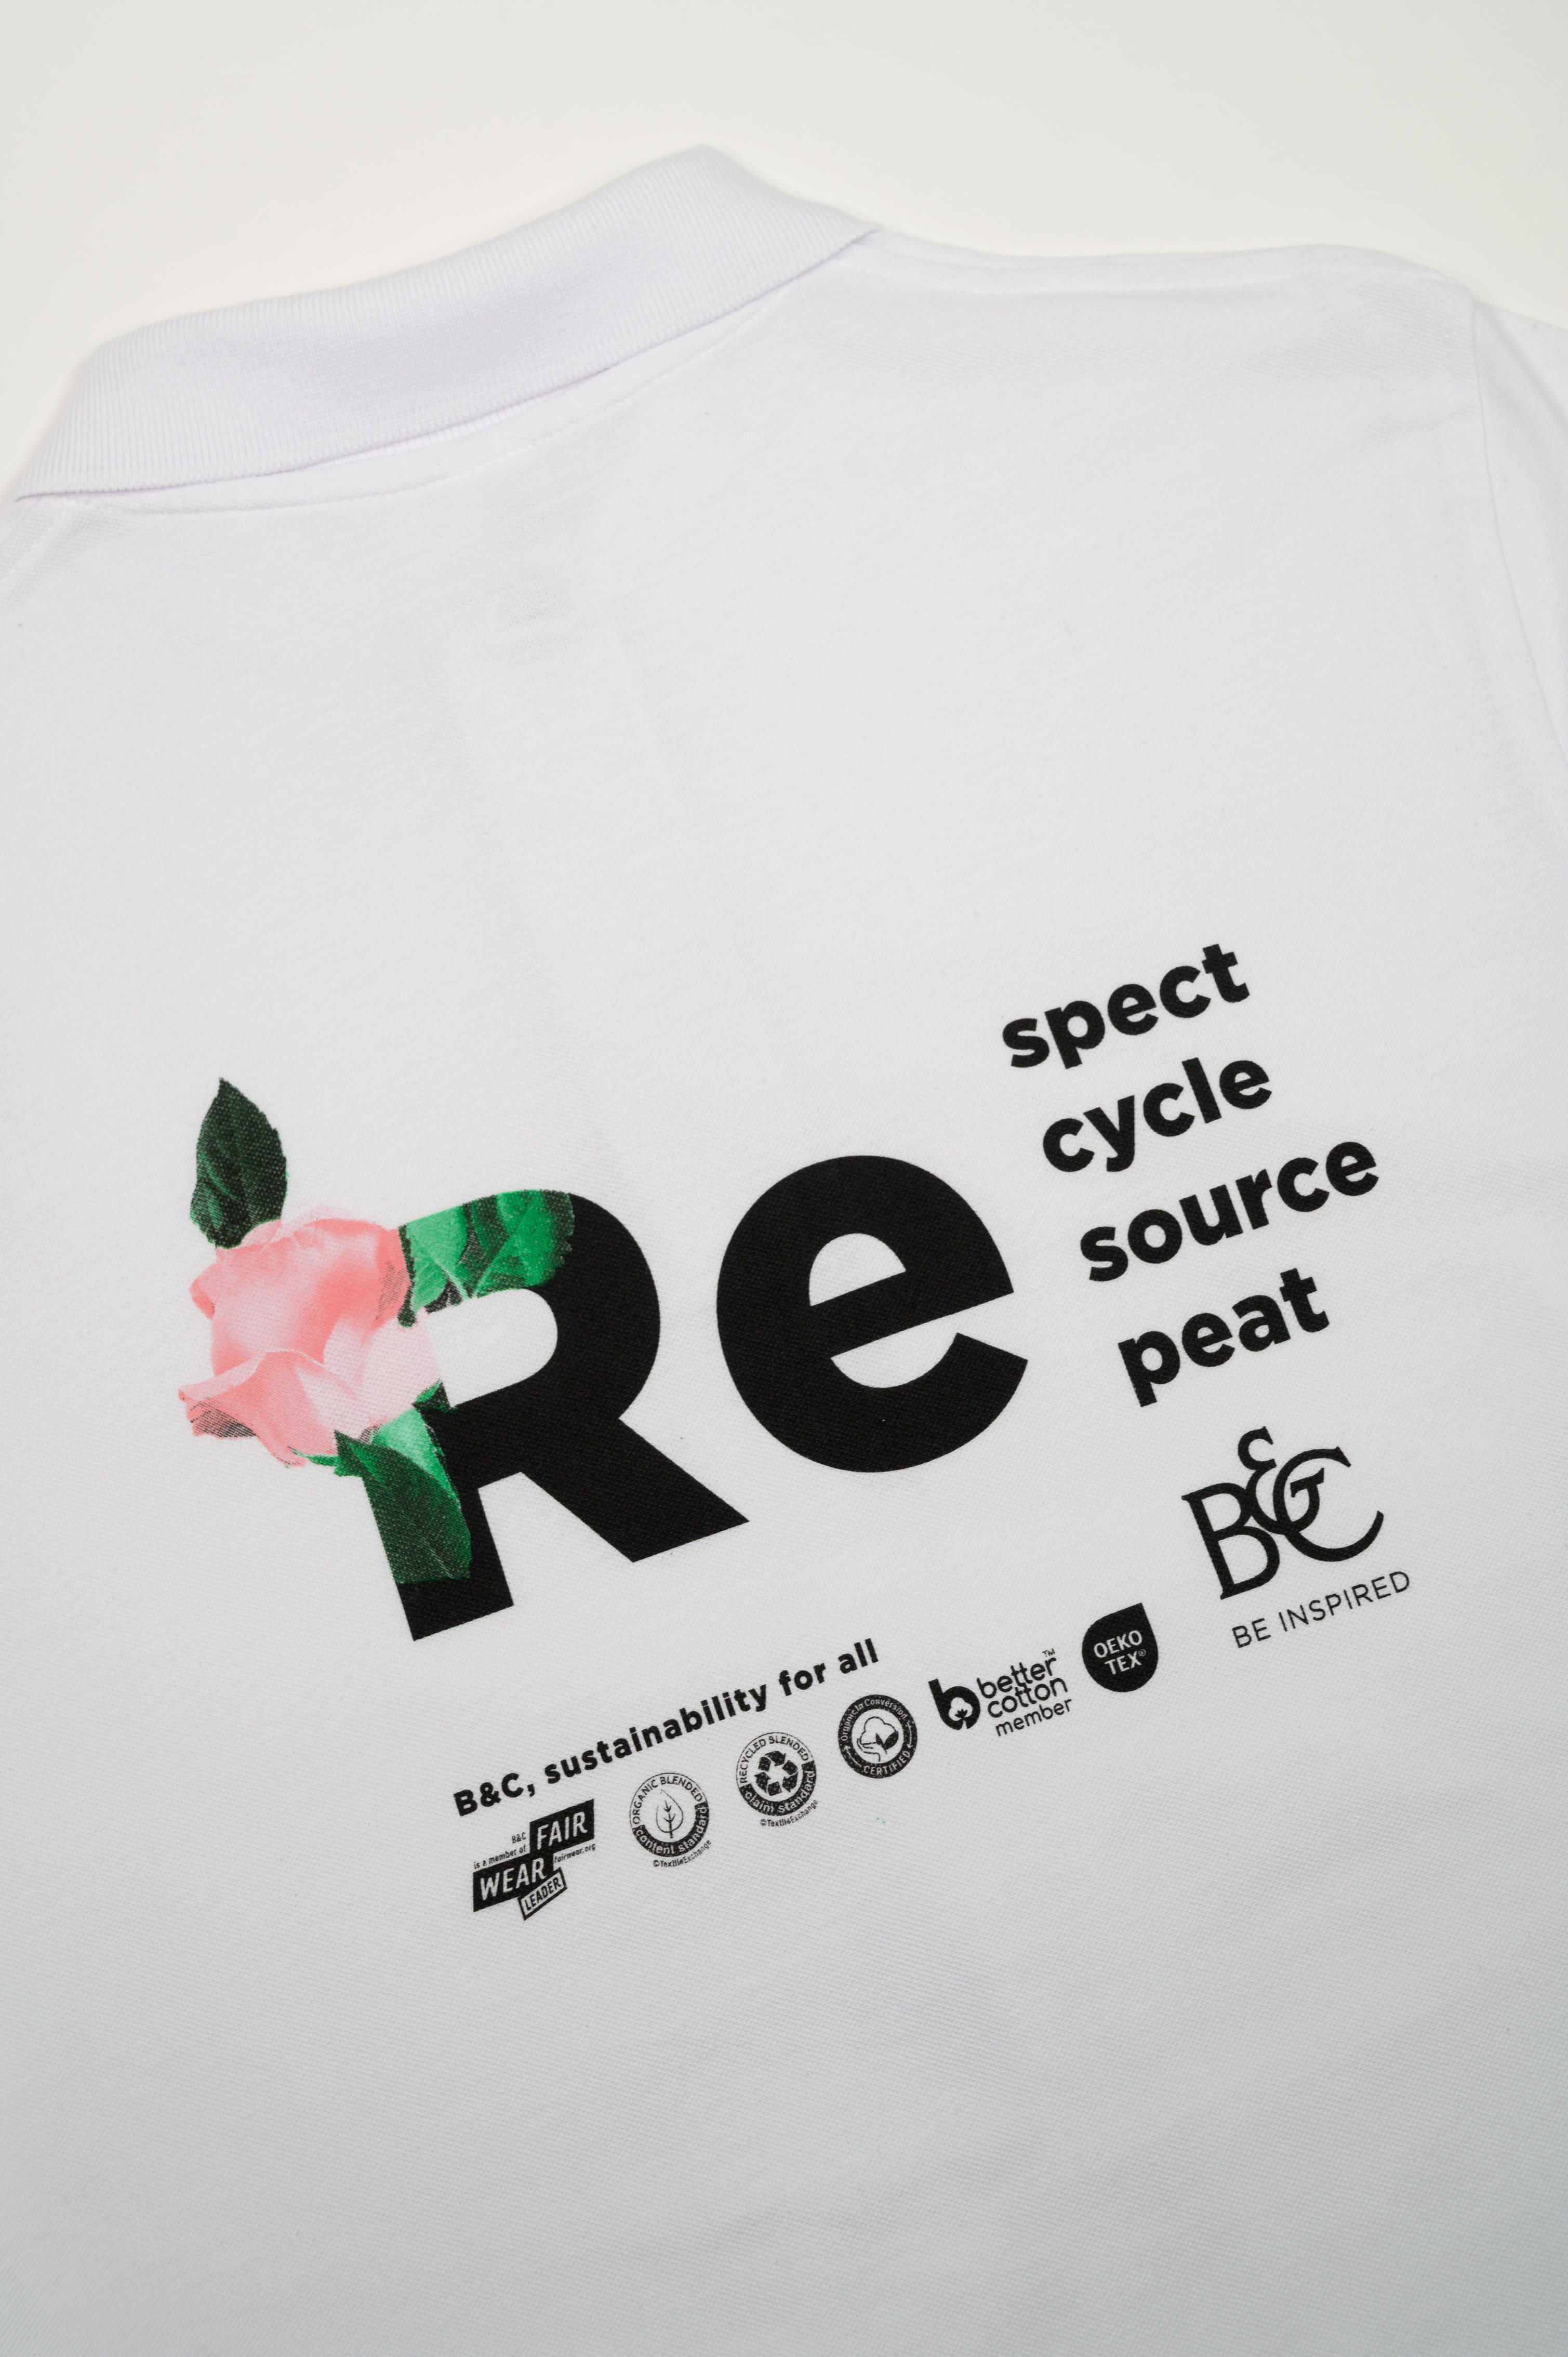 SOME - Request your B&C Printed Sample now